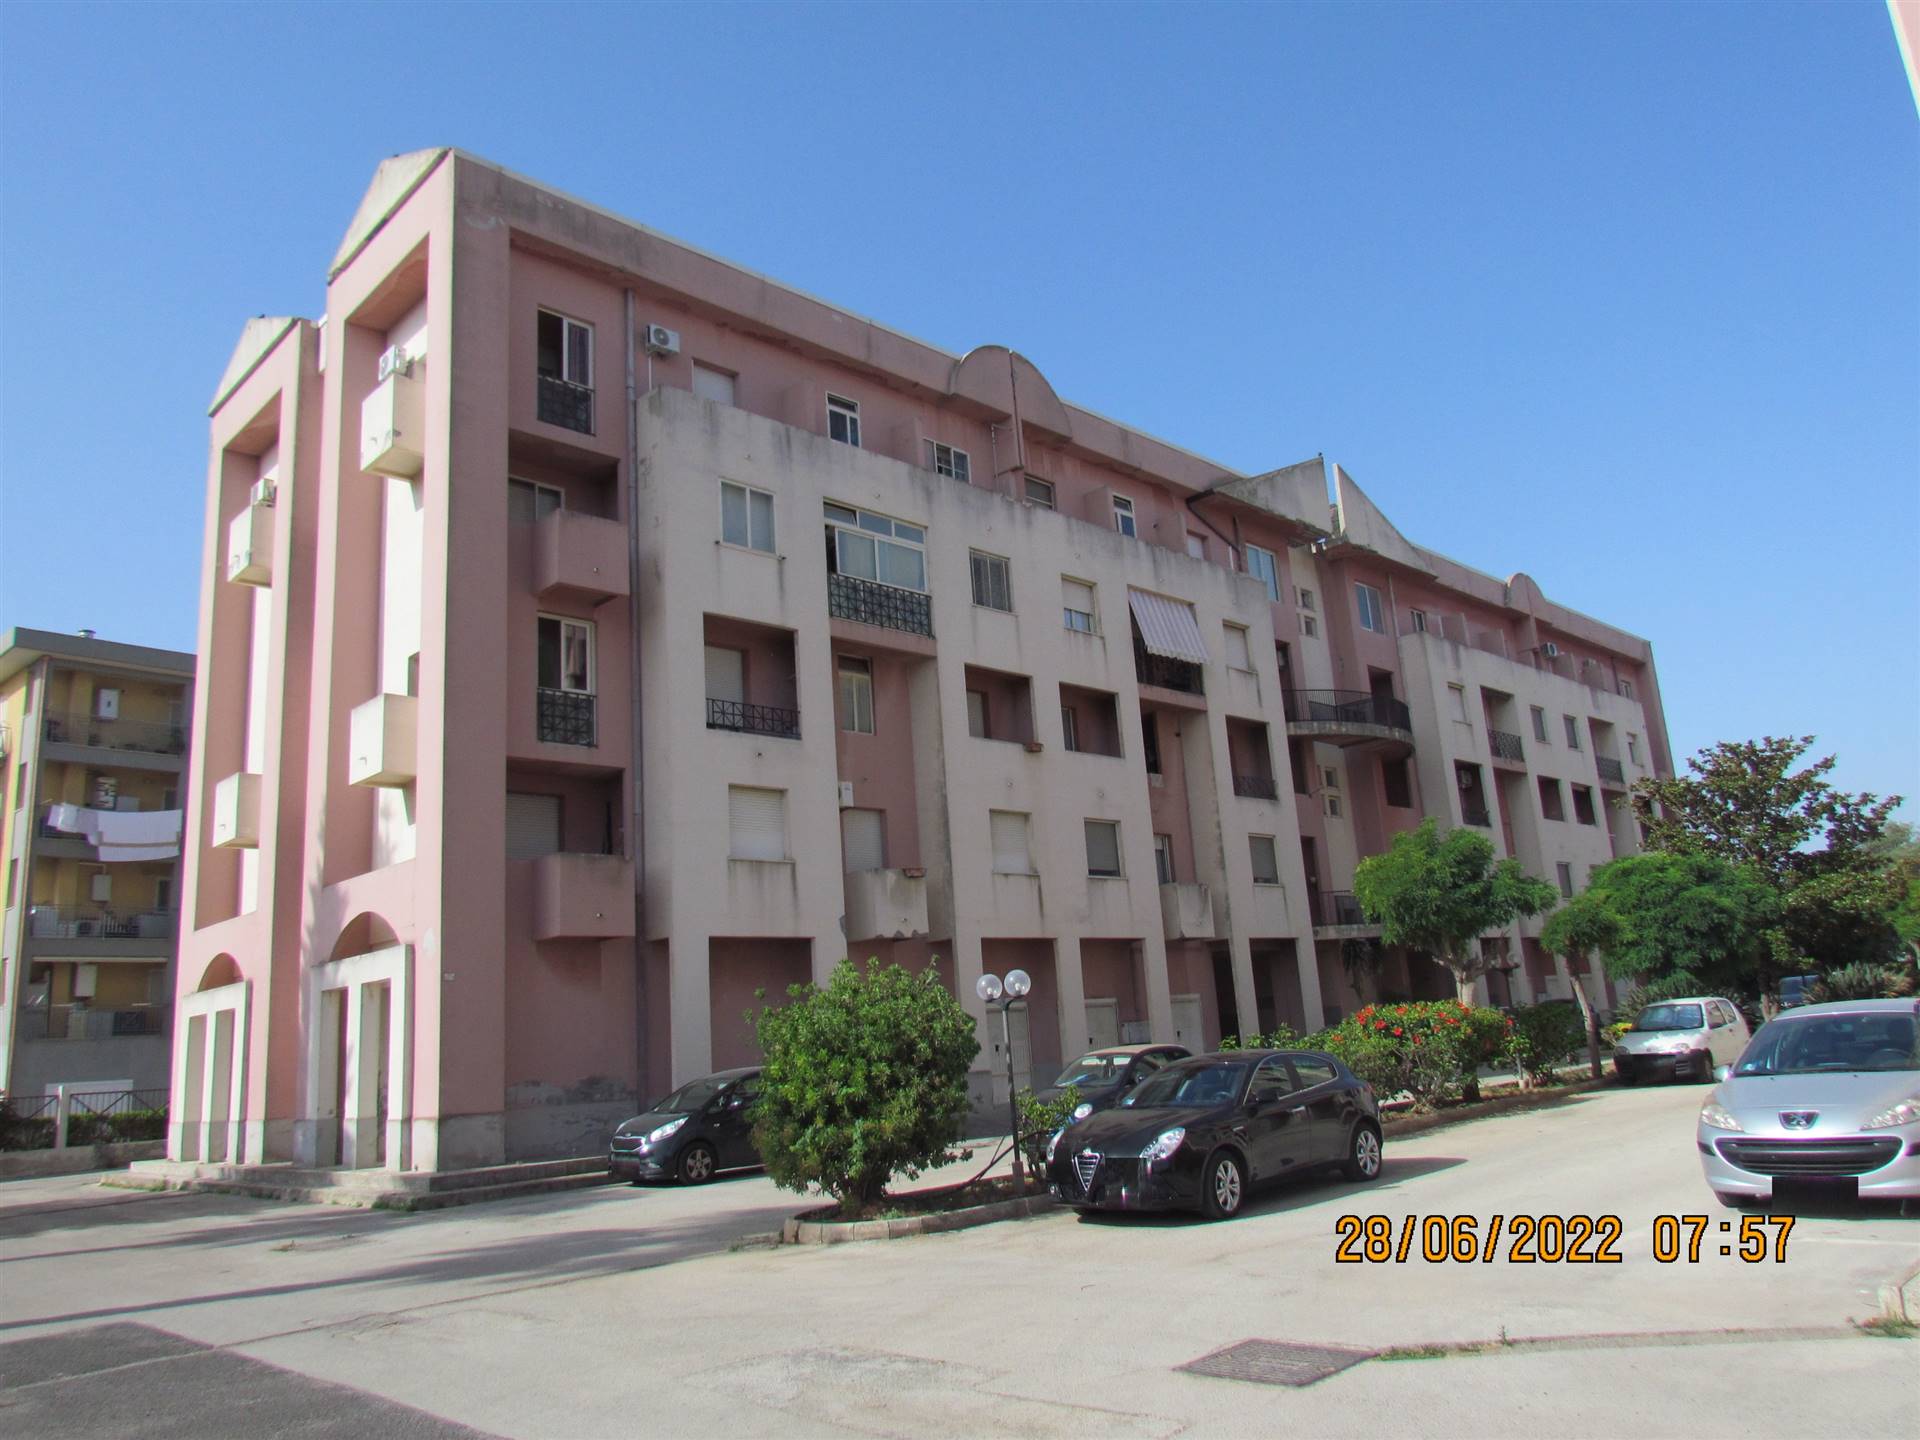 We have a 146 cat. sqm apartment, located on the first and second floor, consisting of five rooms and services. With a 18 sqm garage. WE SELL ONLY 